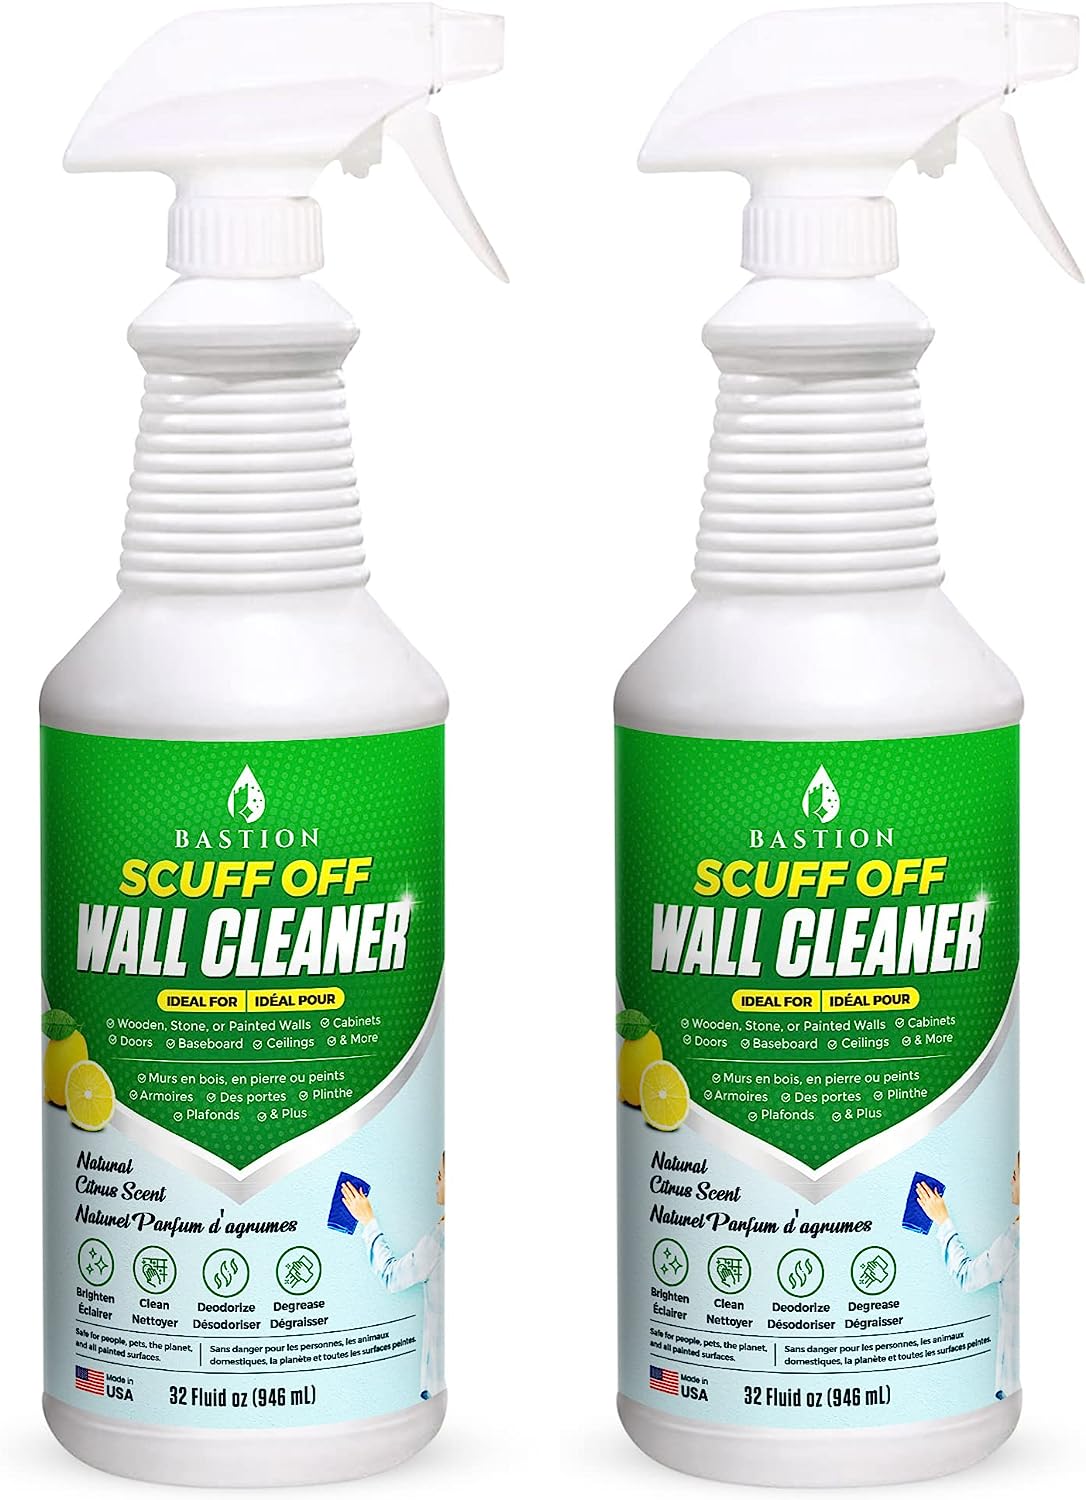 Bastion Wall Cleaner Spray: Multipurpose Solution - [...]